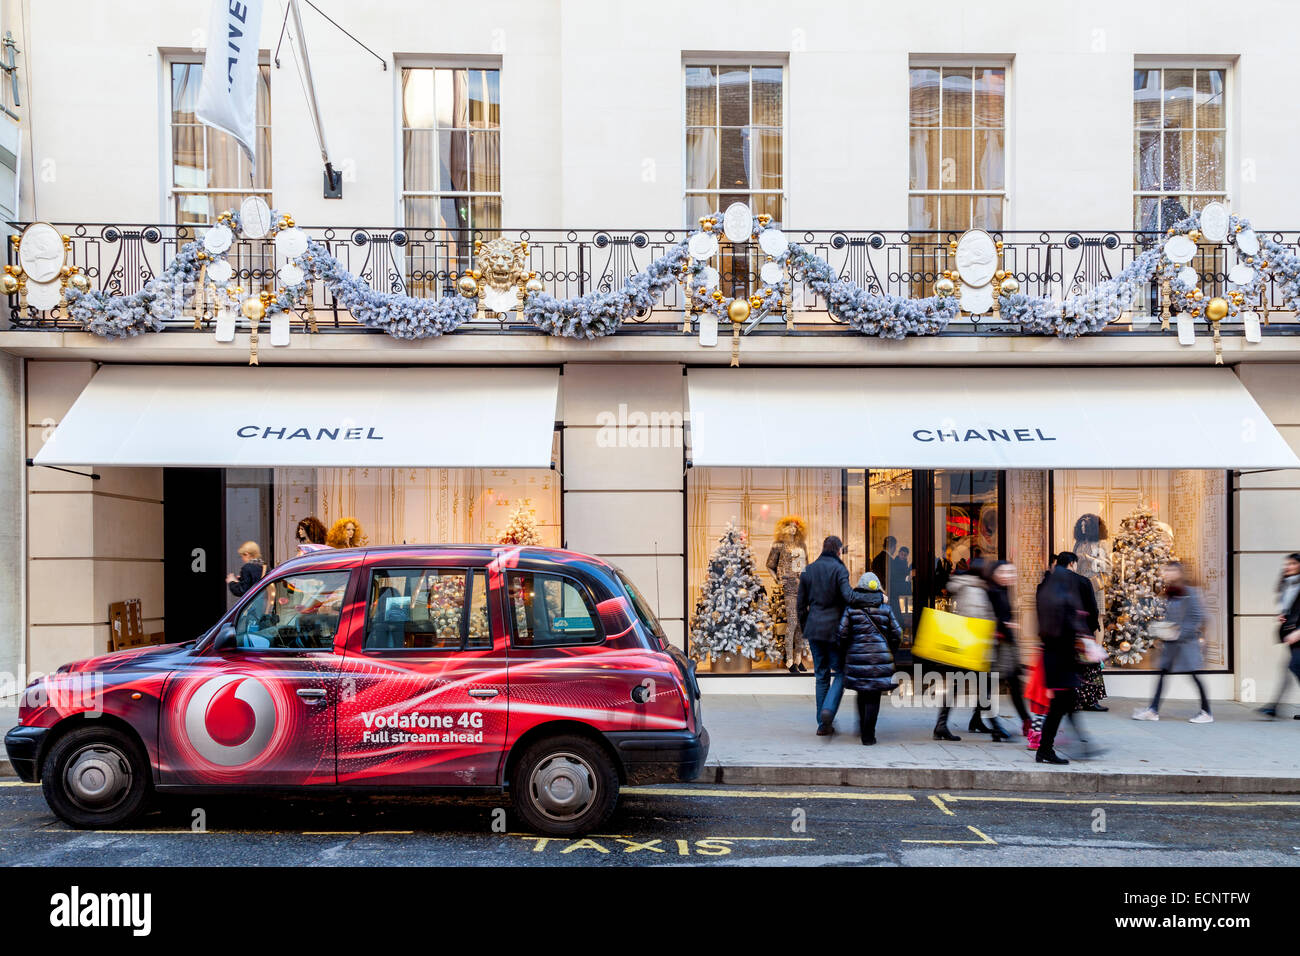 Chanel Store on New Bond Street, London, UK, Car Parked in Front